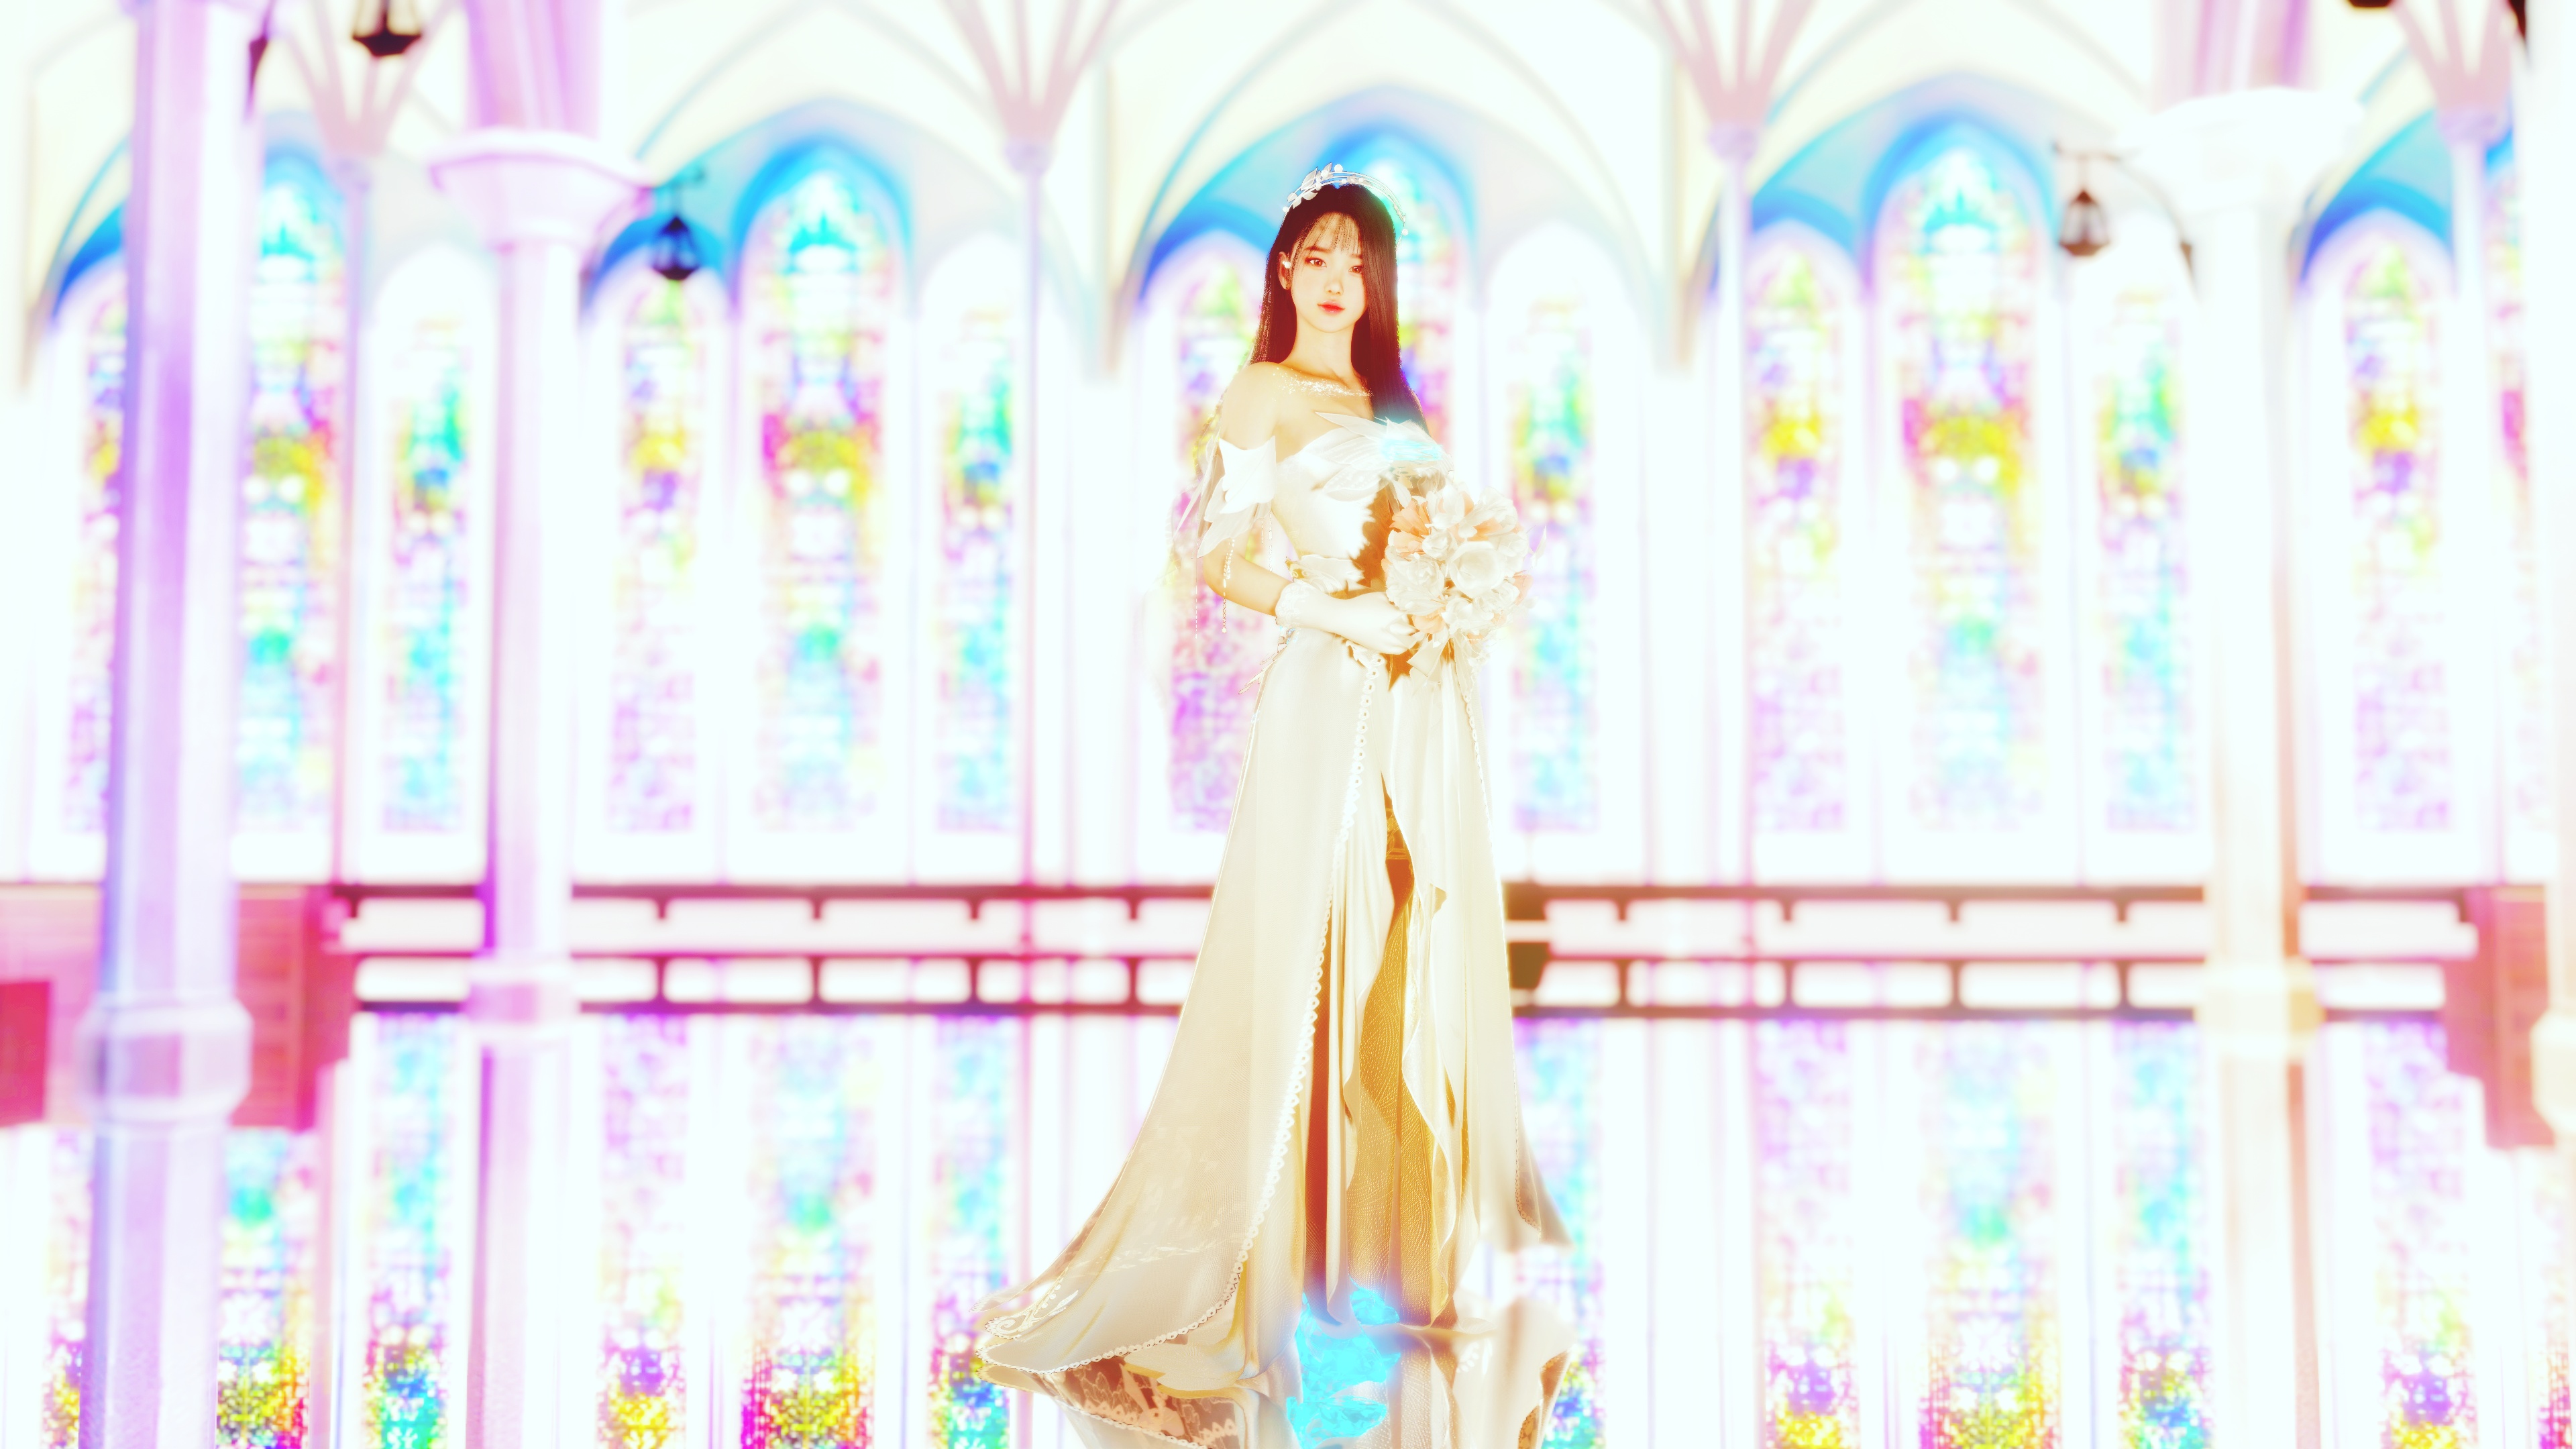 Stained glass and Wedding dress 02